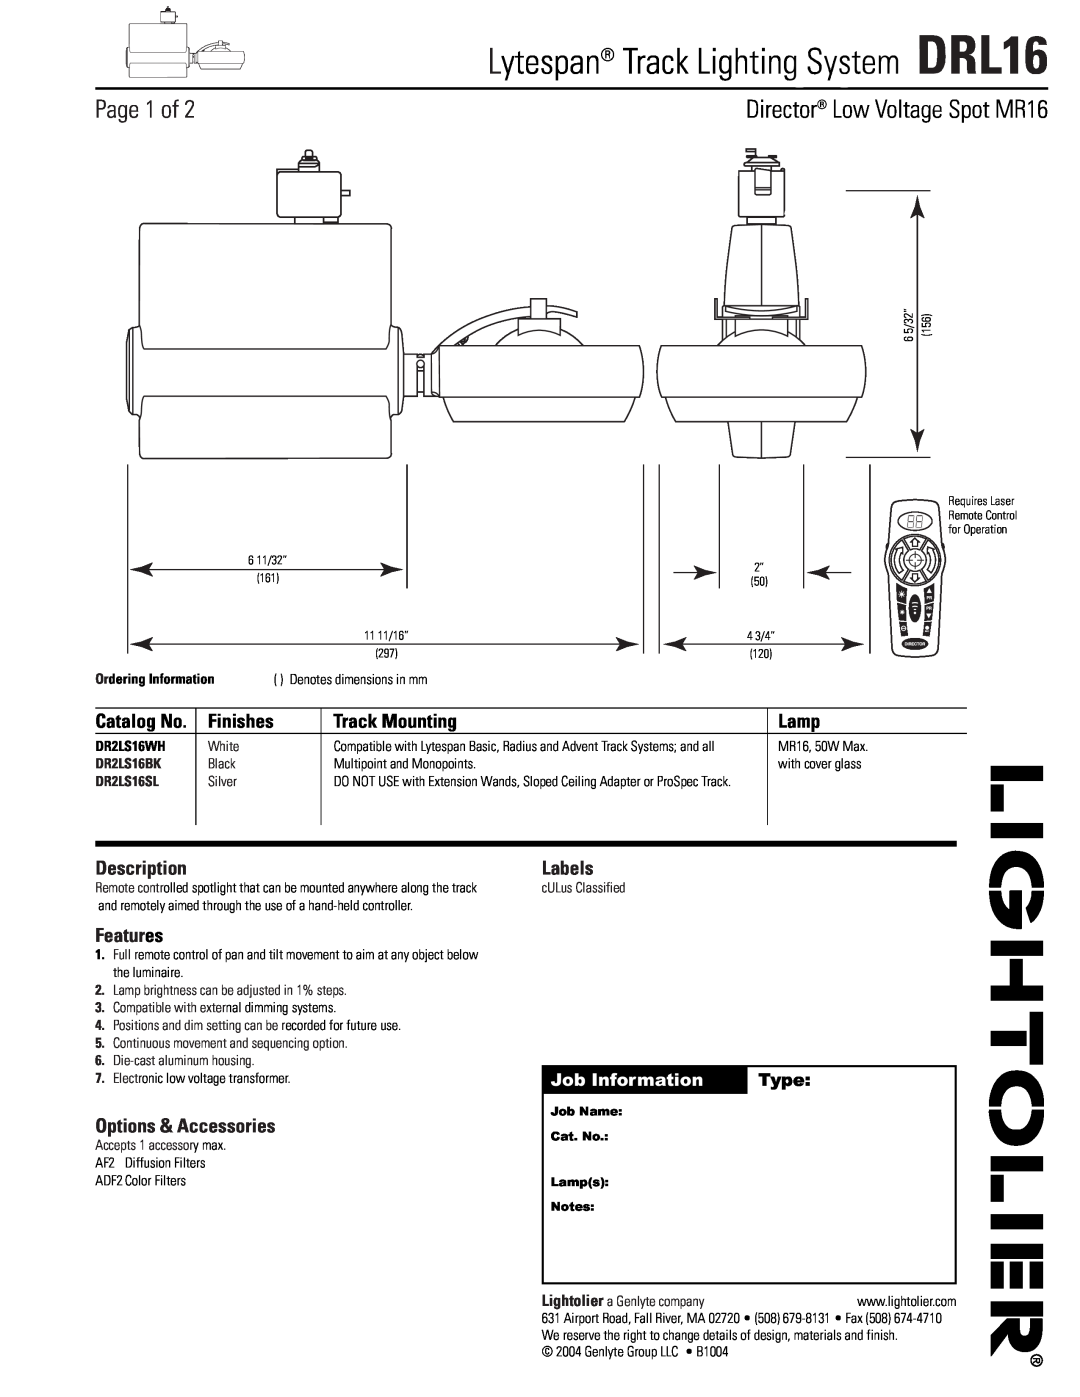 Lightolier DRL16 dimensions Page 1 of, Director, Finishes, Track Mounting, Lamp, Description, Features, Labels, Catalog No 